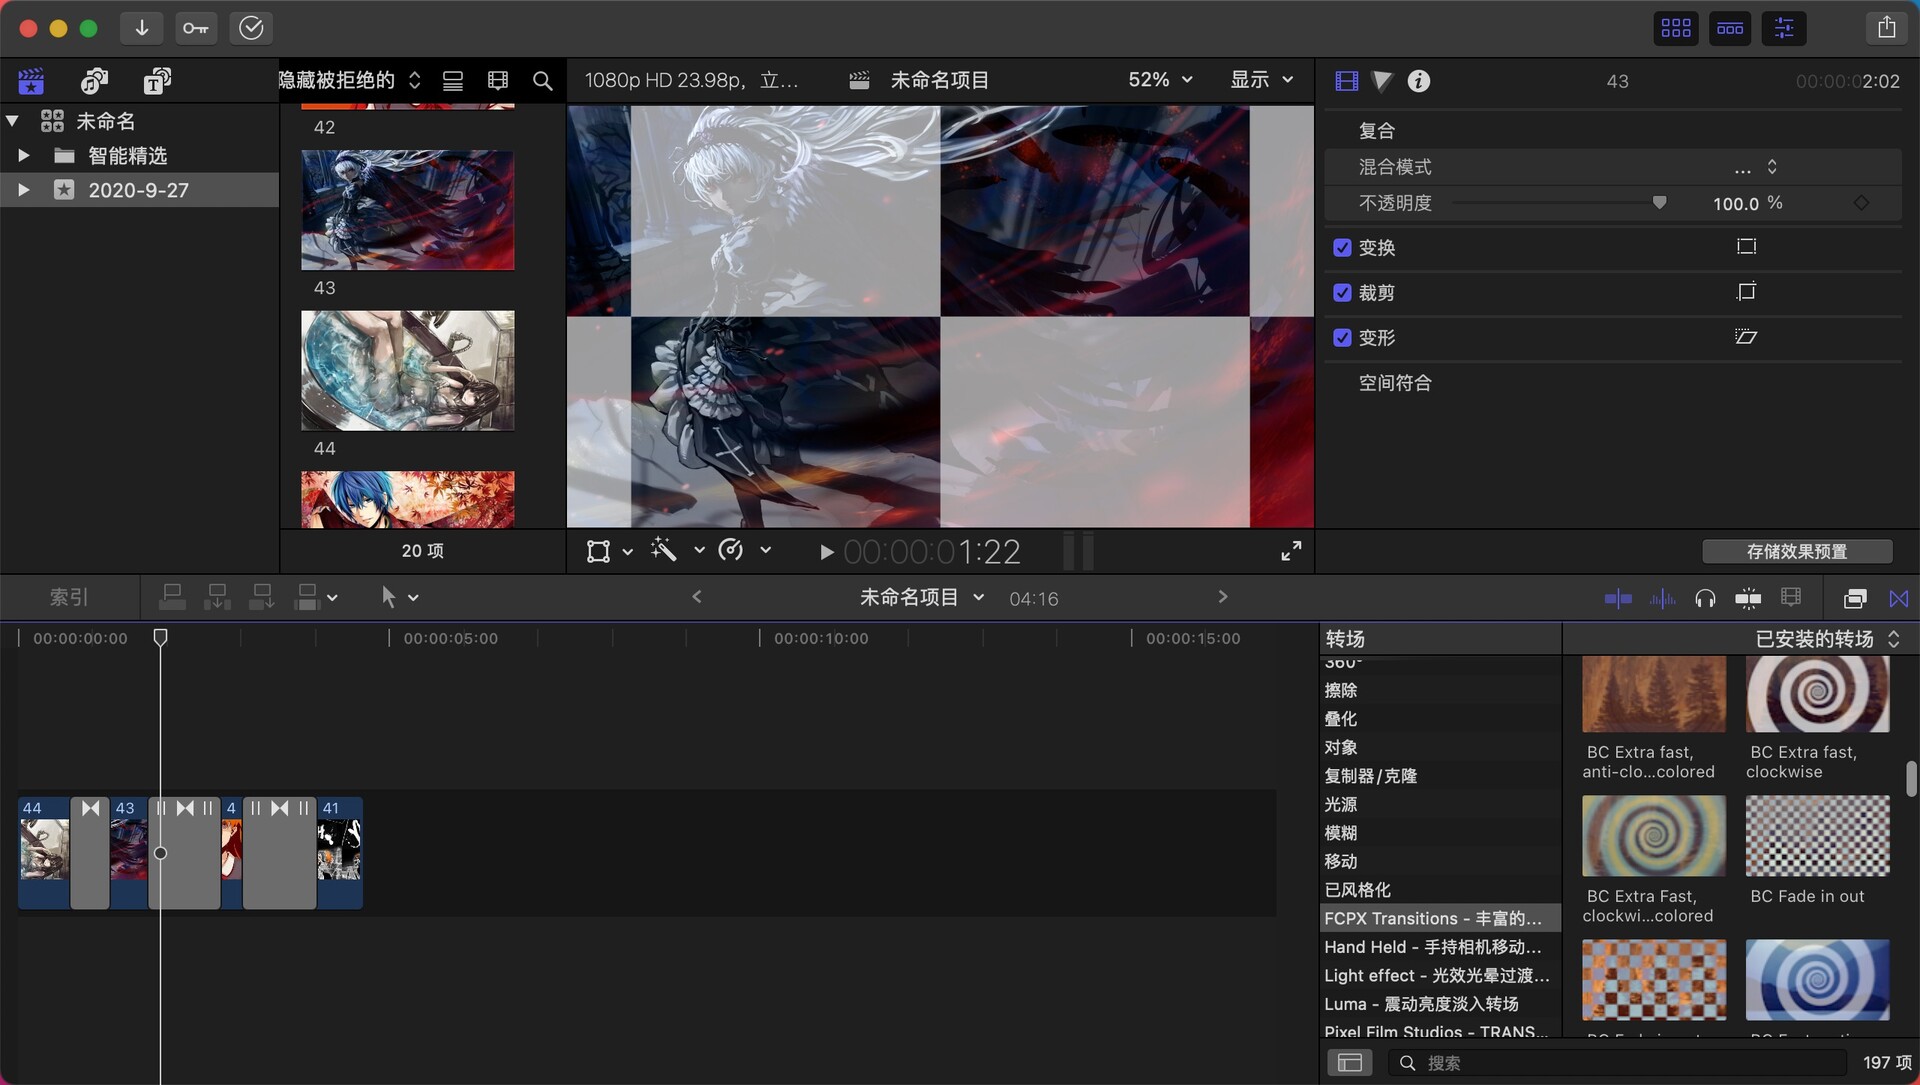 fcpx插件:FCPX Transitions(丰富的效果转场)